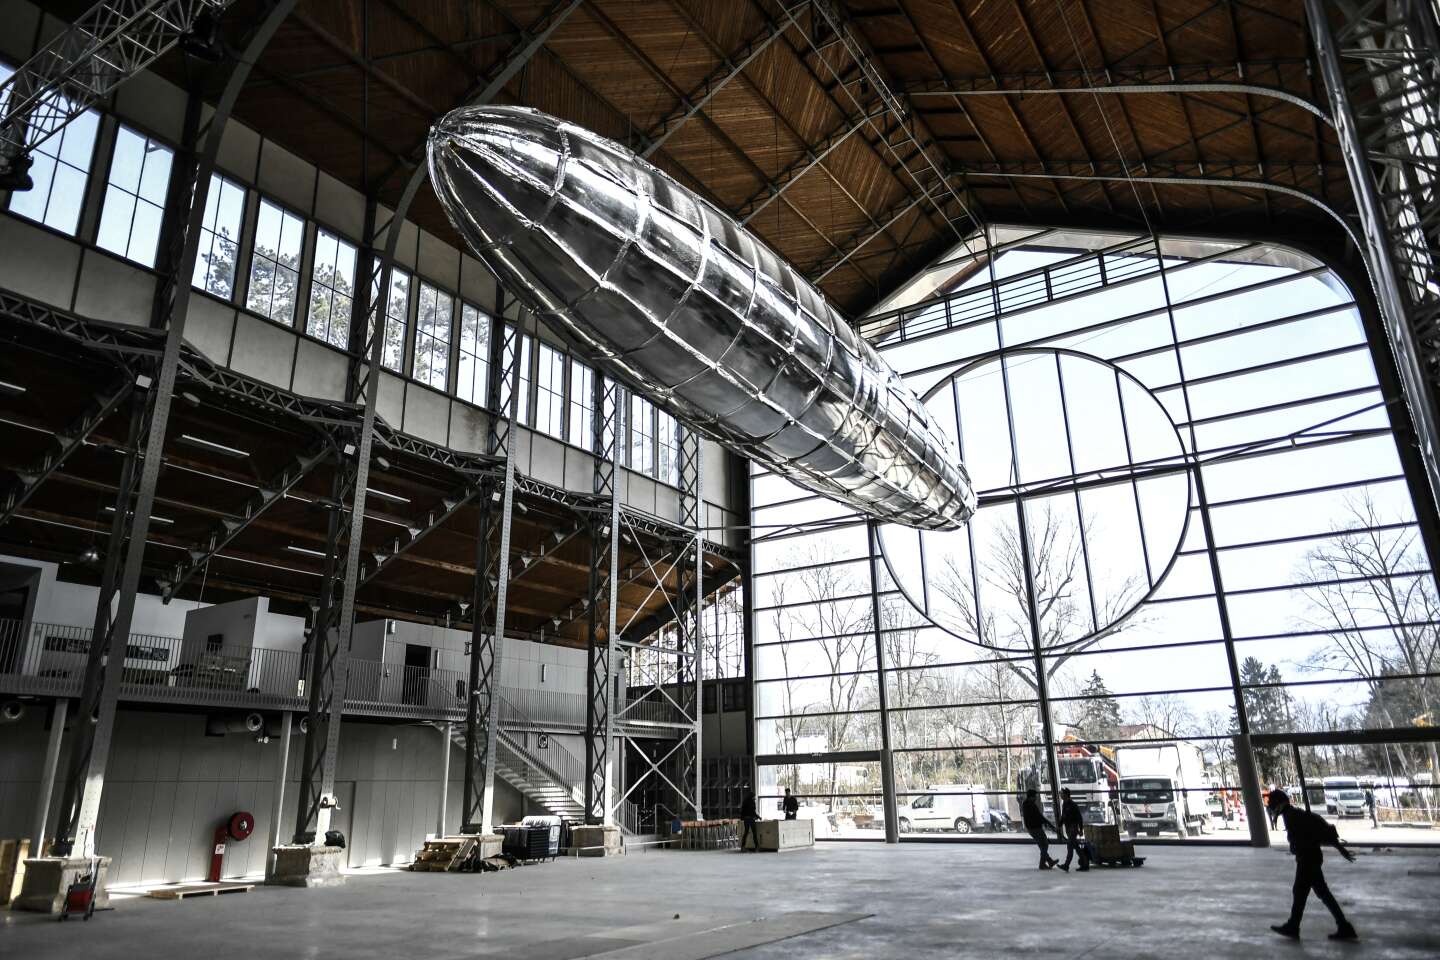 In Meudon, a former airship balloon workshop is transformed into a cultural center